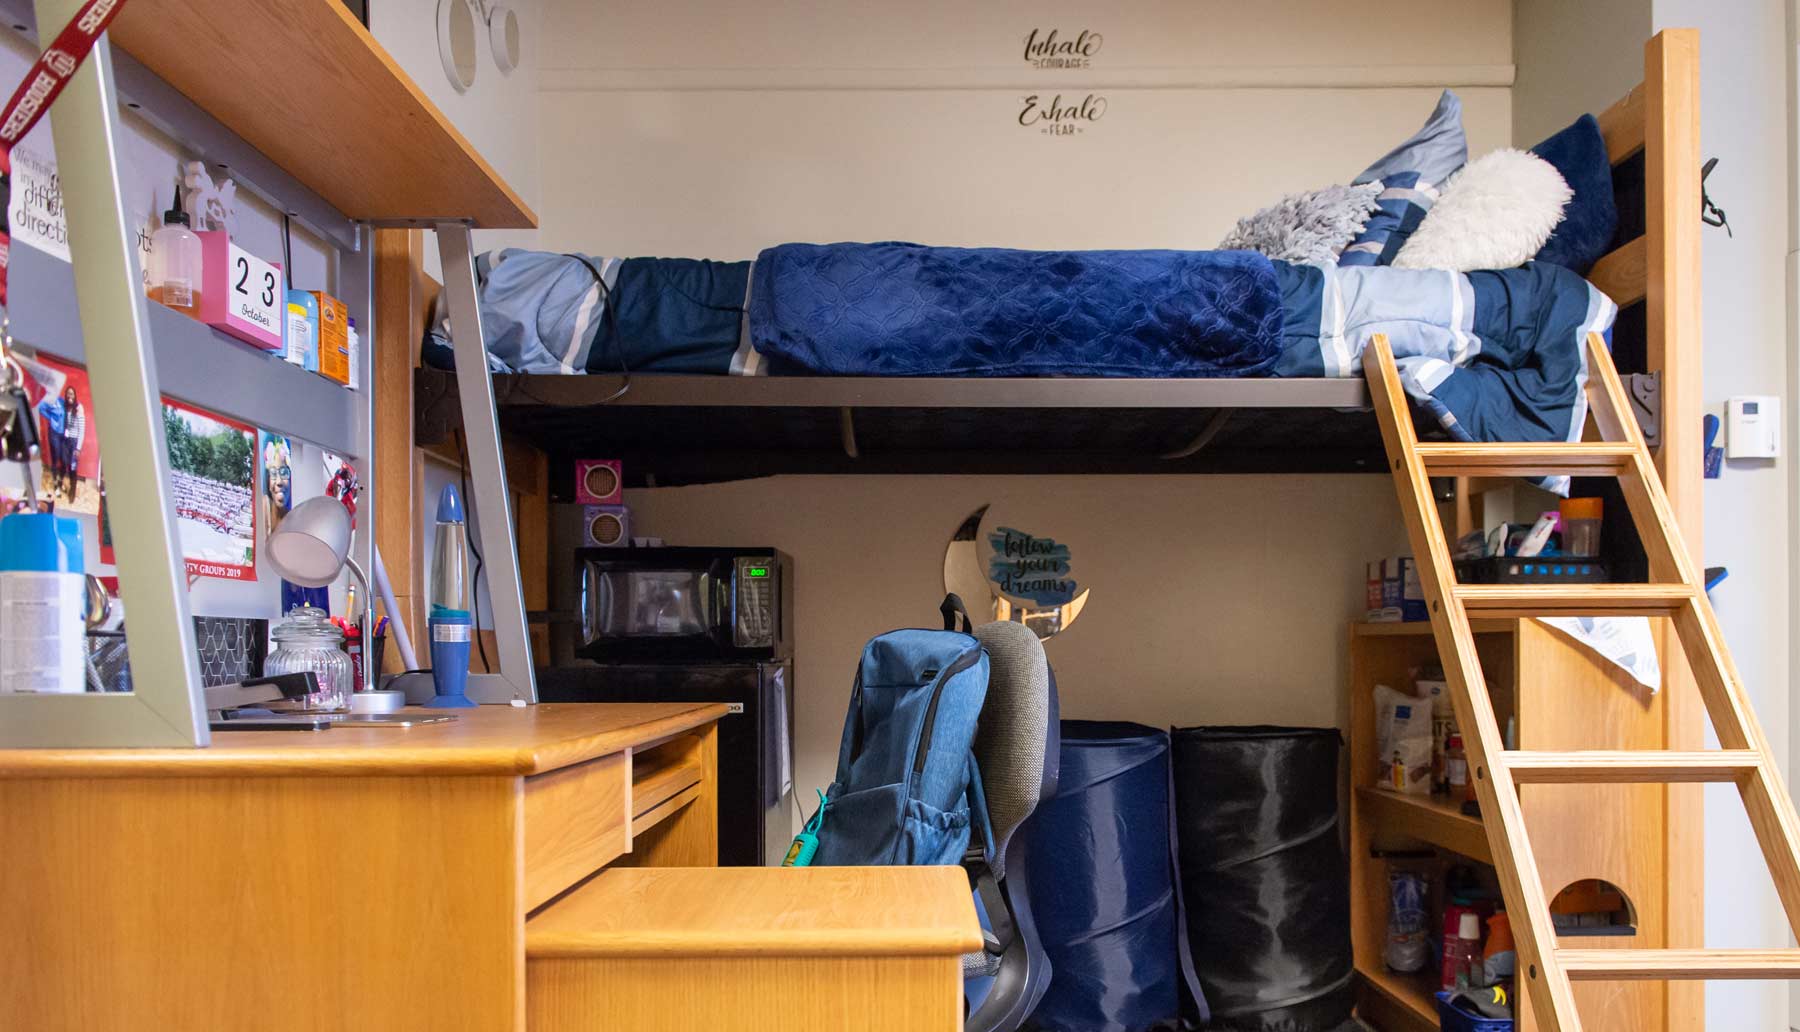 A lofted bed in a dorm room.